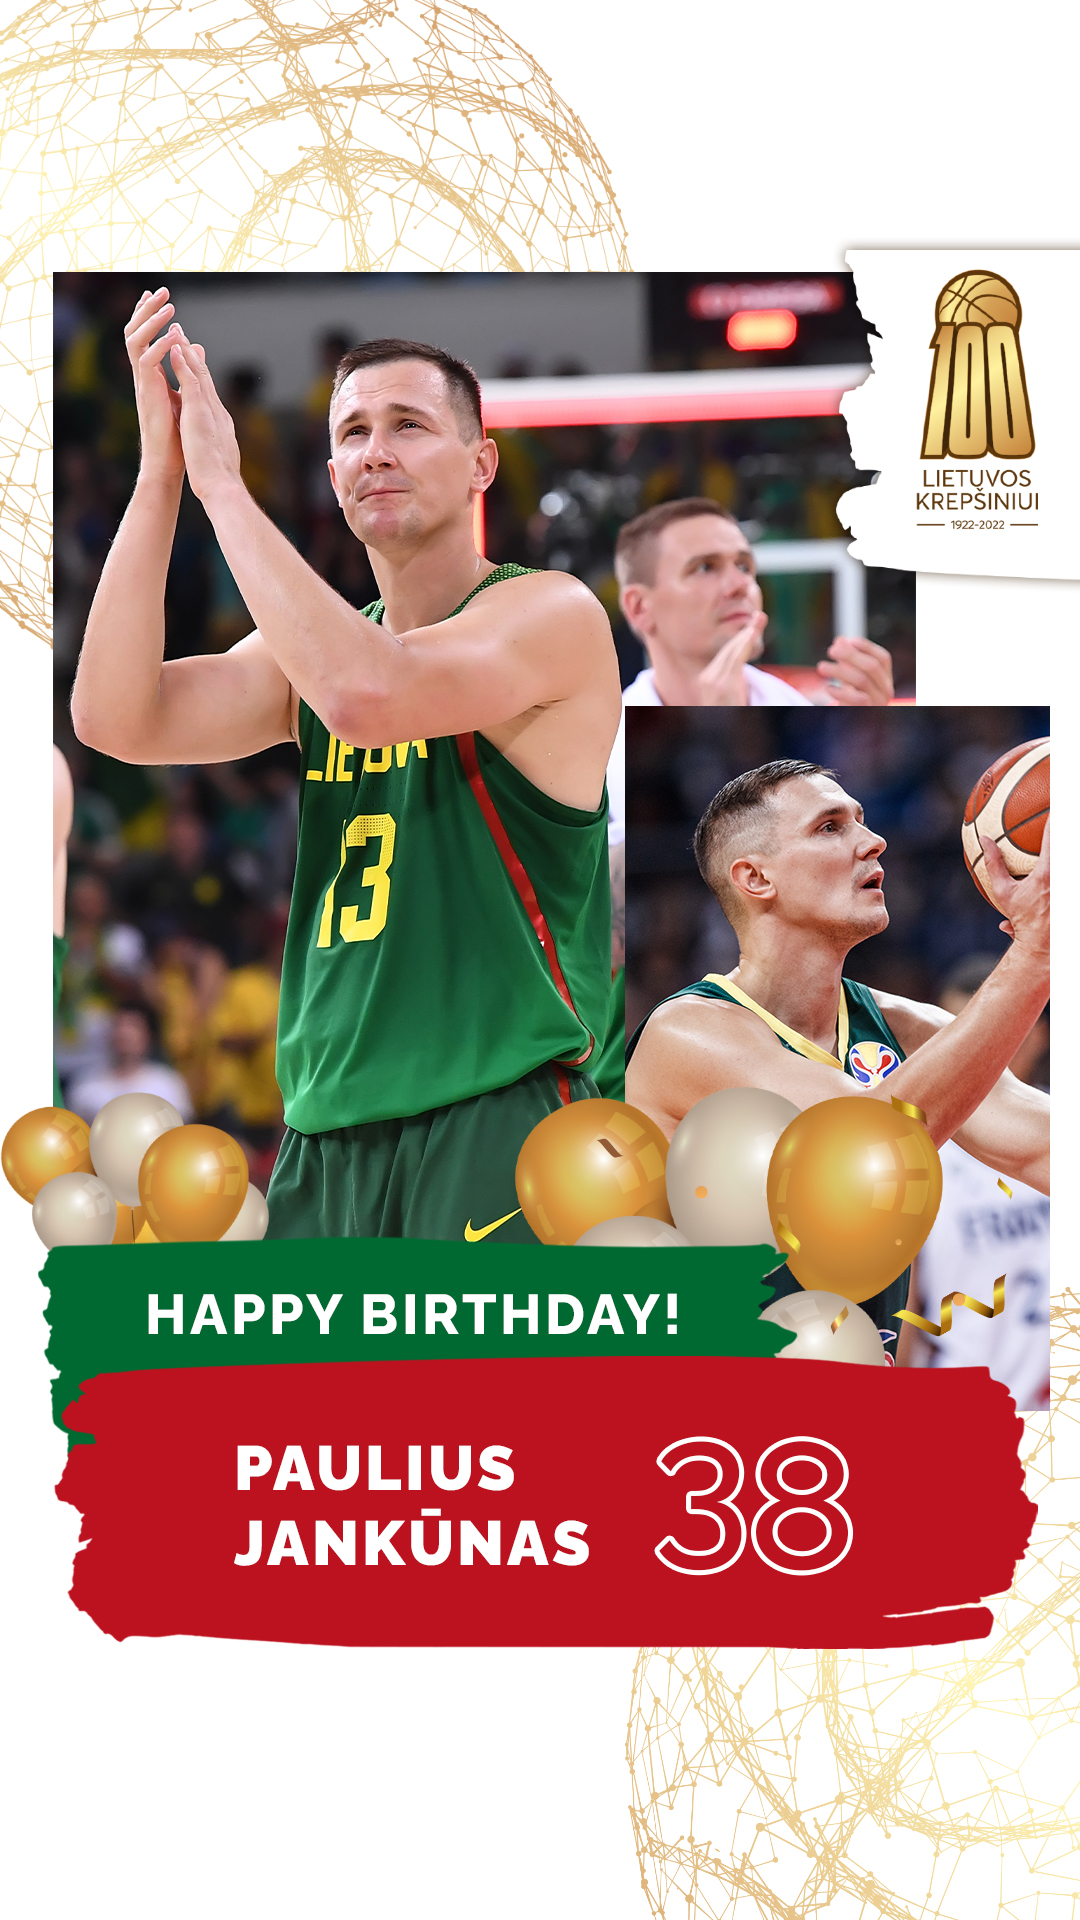 Happy birthday to the Lithuanian version of Tim Duncan - Paulius Jank nas!  